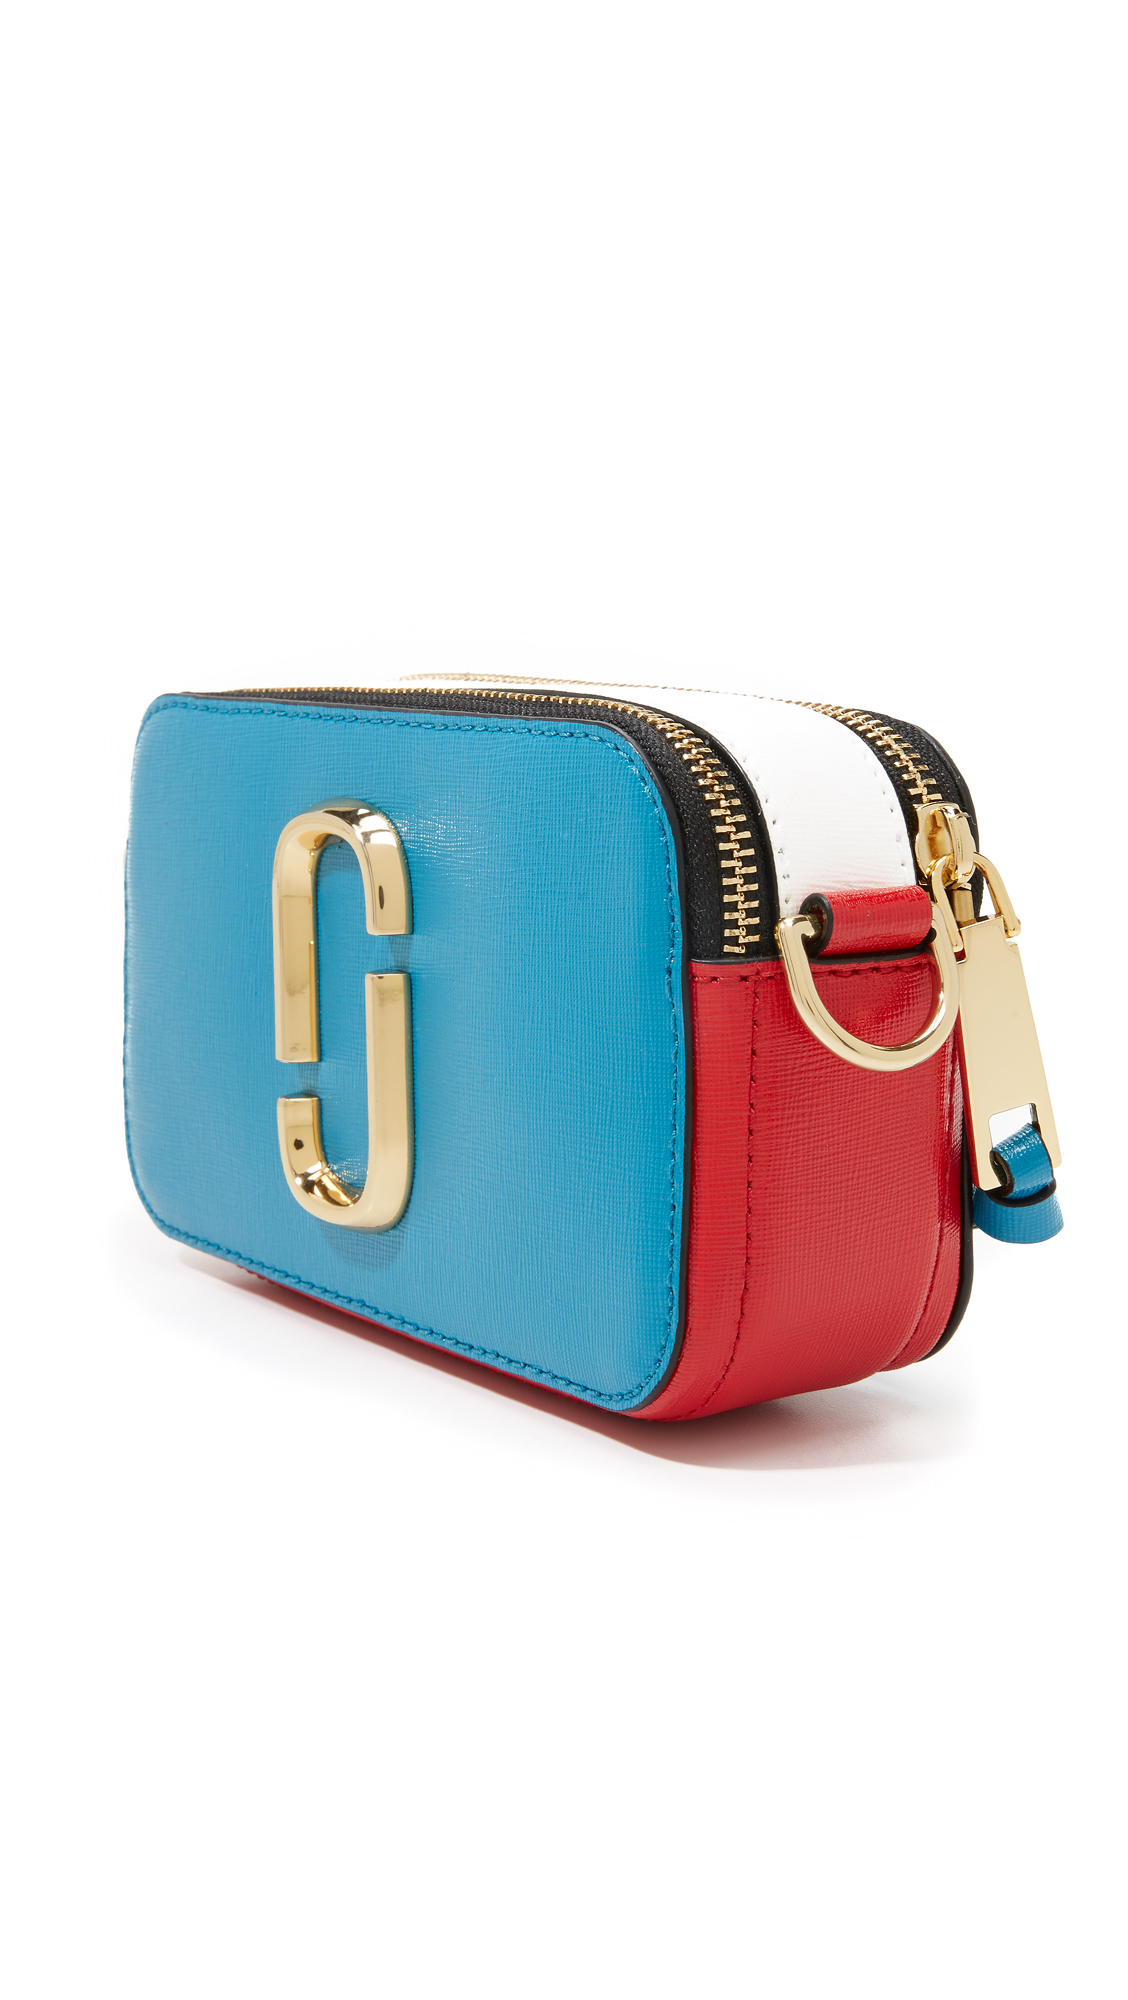 Lyst - Marc Jacobs Snapshot Colorblock Camera Bag in Blue